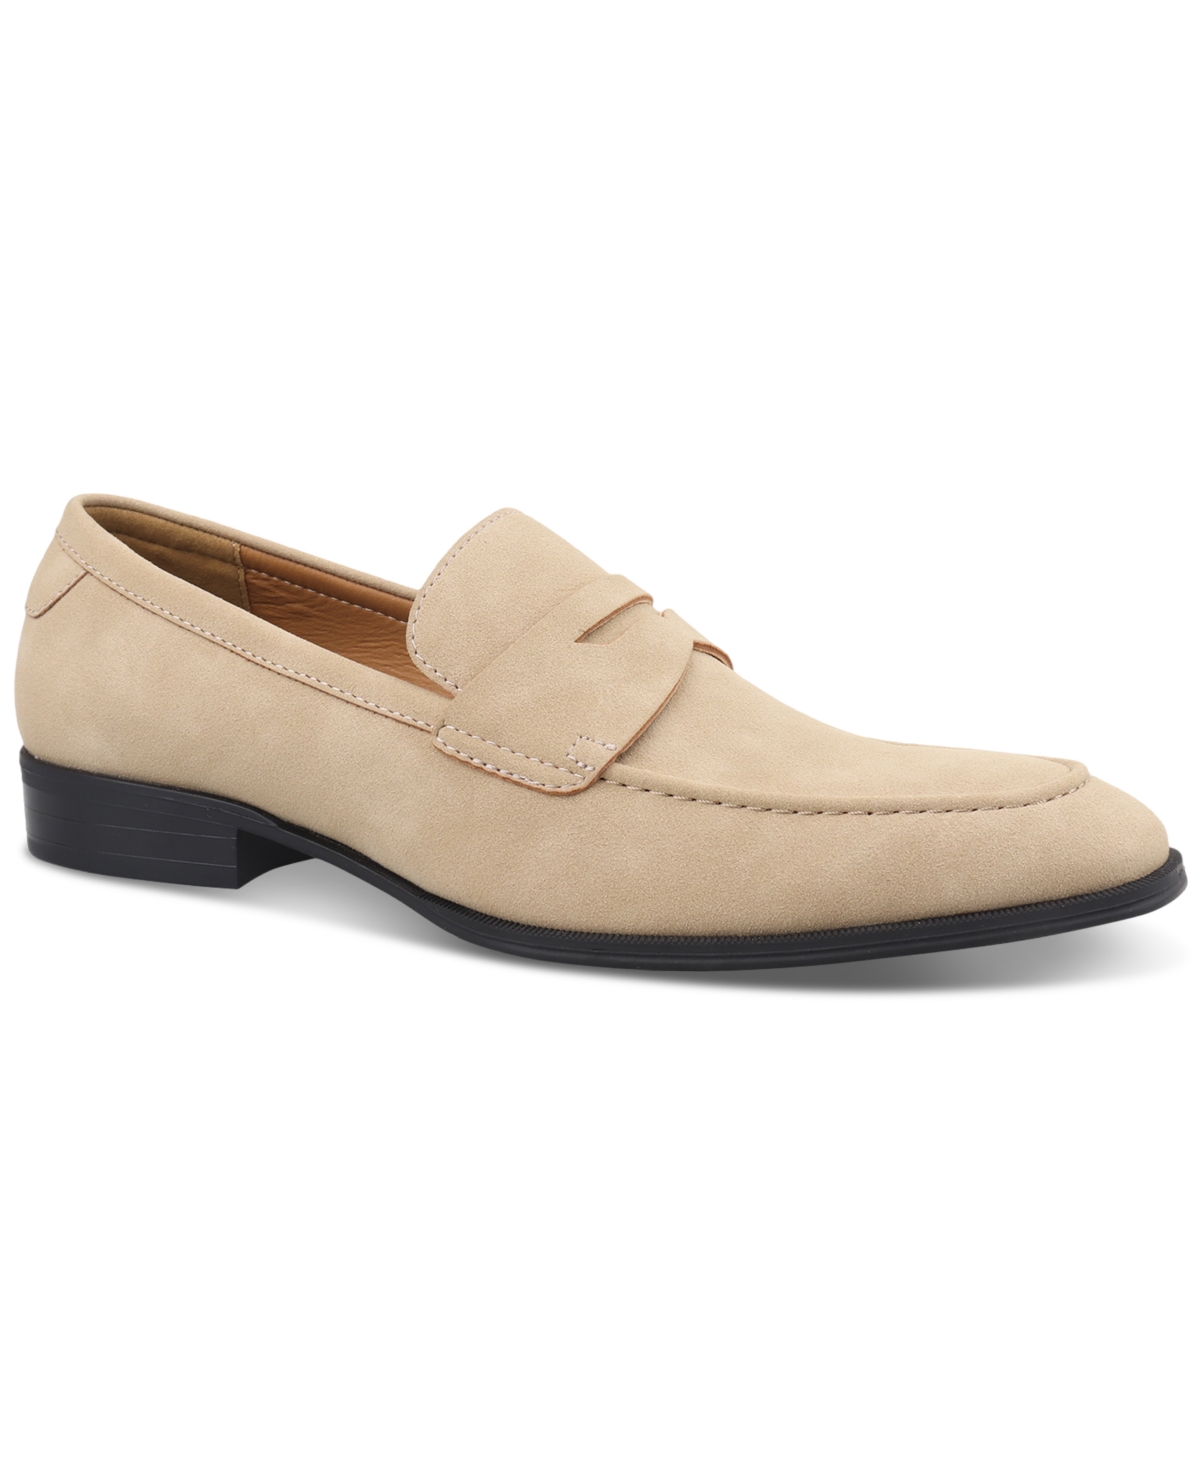 Men's Penny Slip-On Penny Loafers, Created for Macy's - Sand